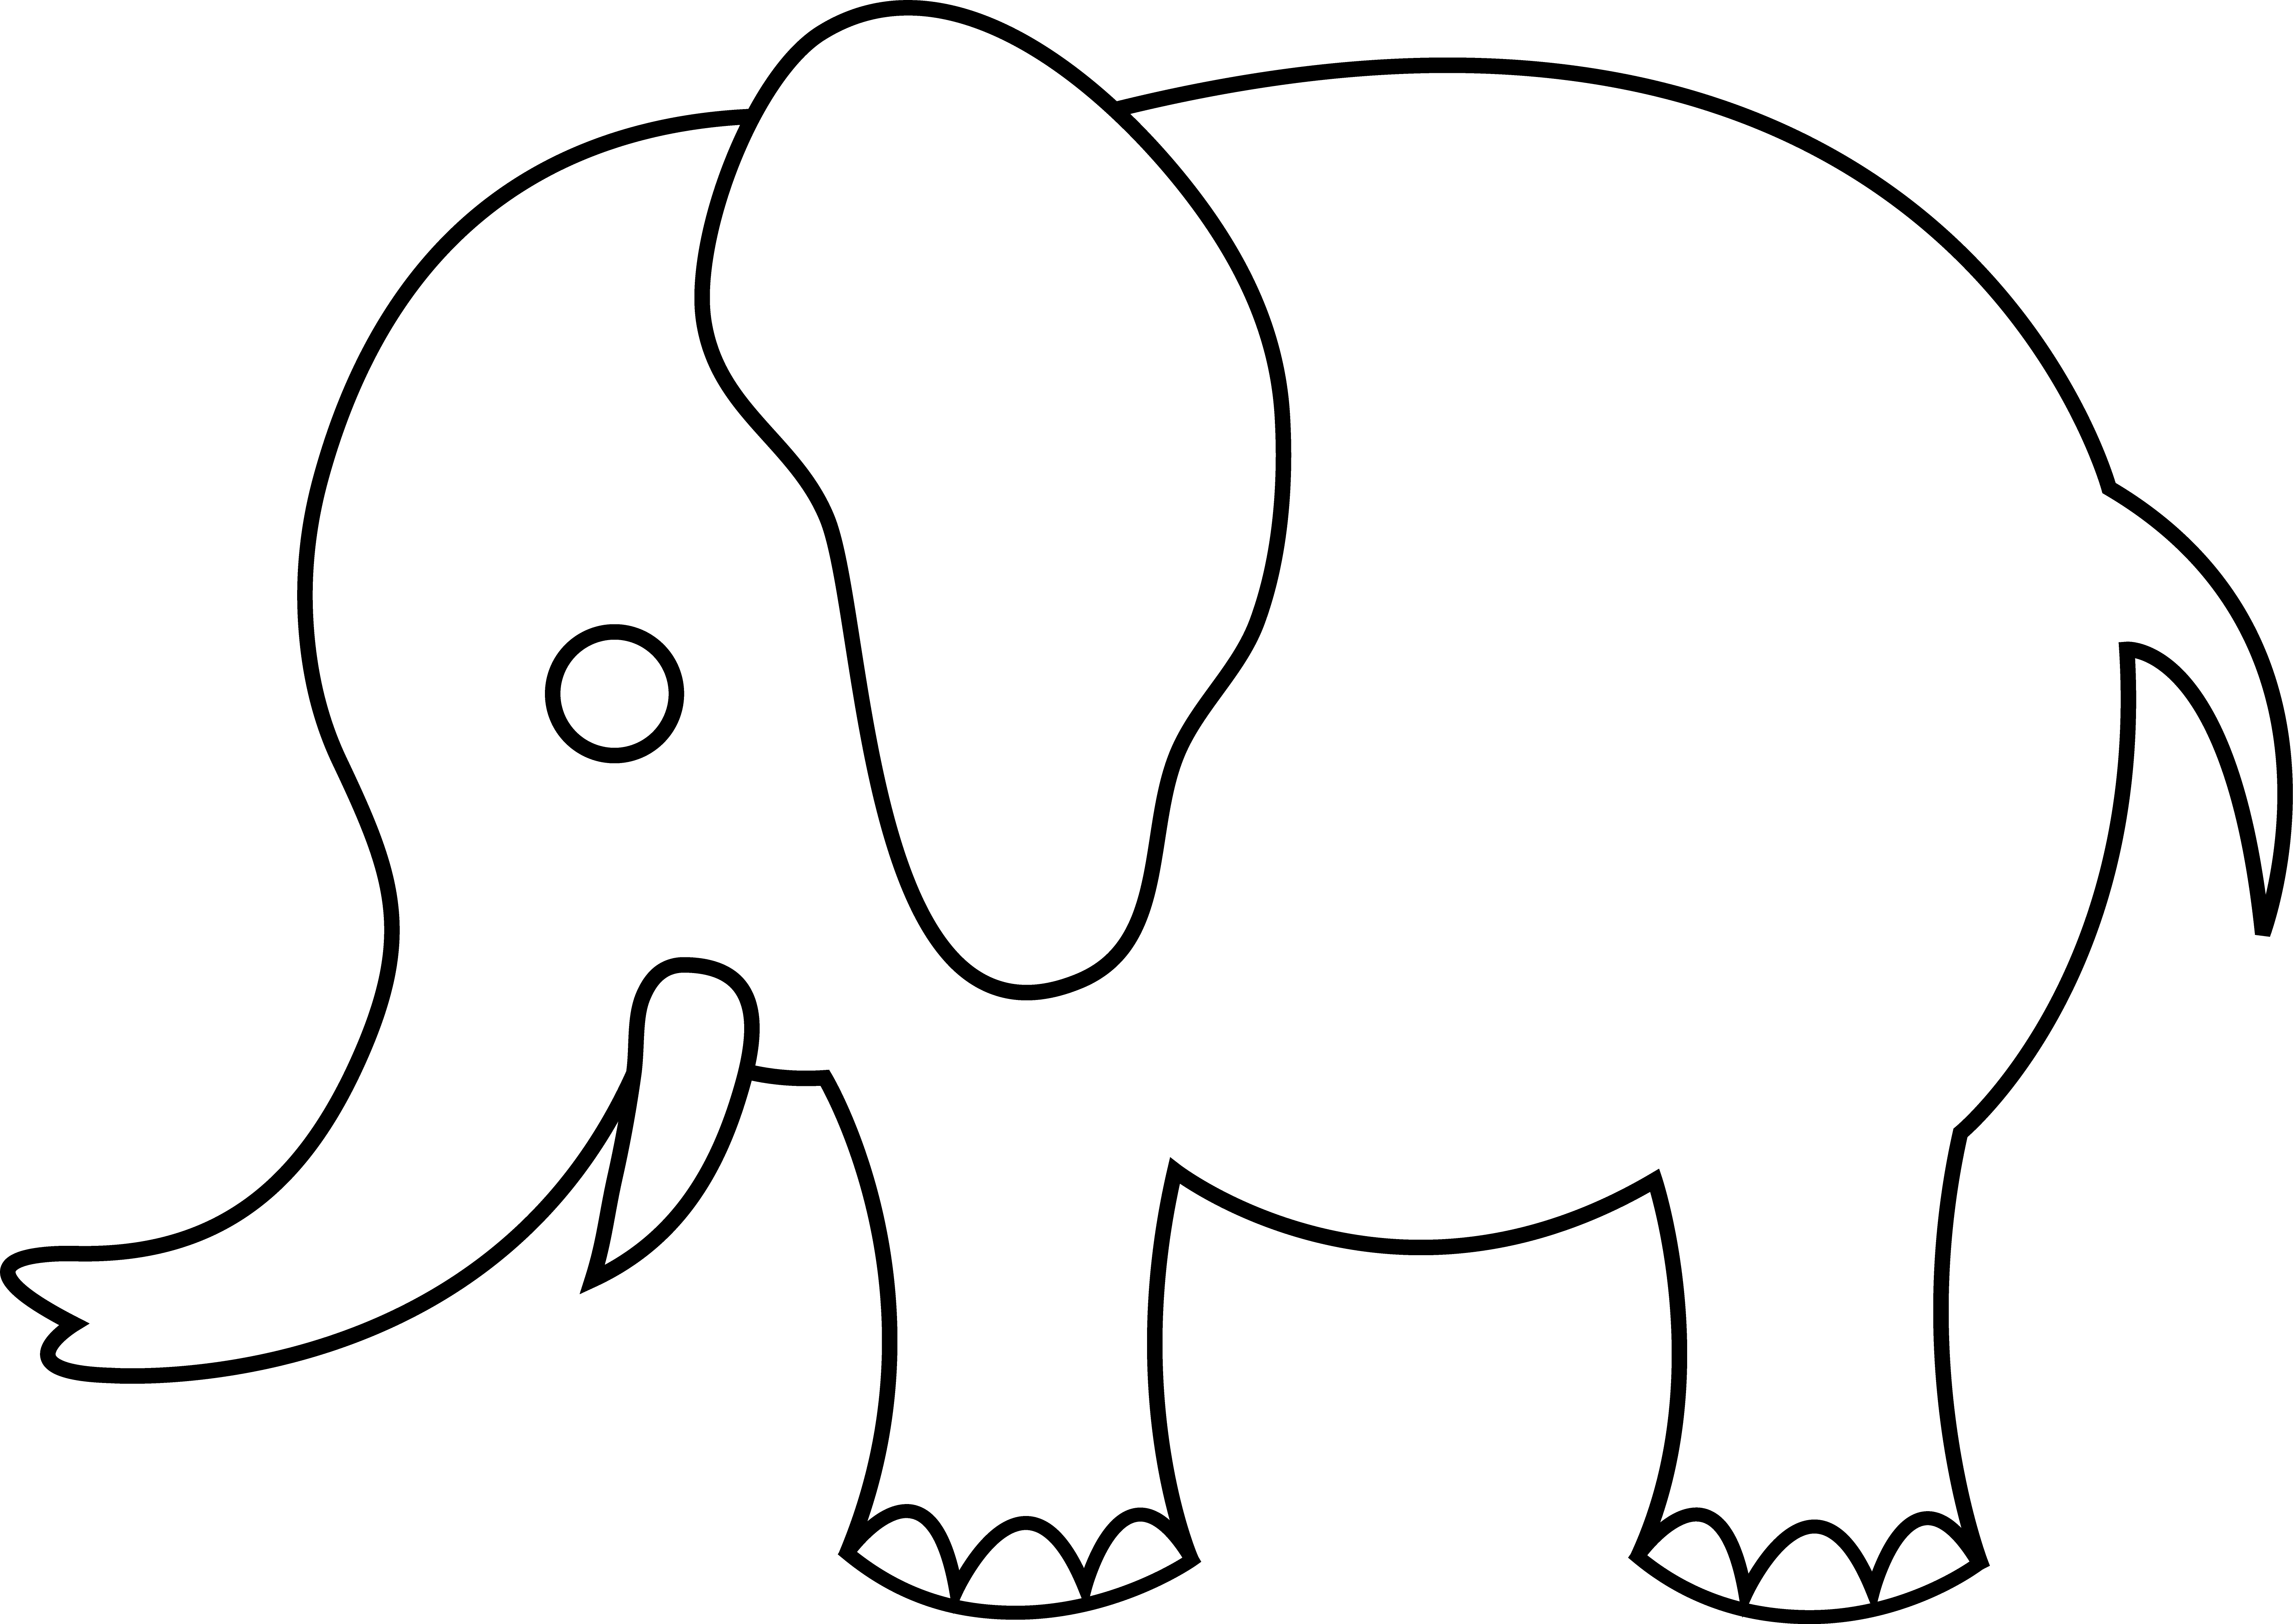 Free Outline Of An Elephant, Download Free Outline Of An Elephant png